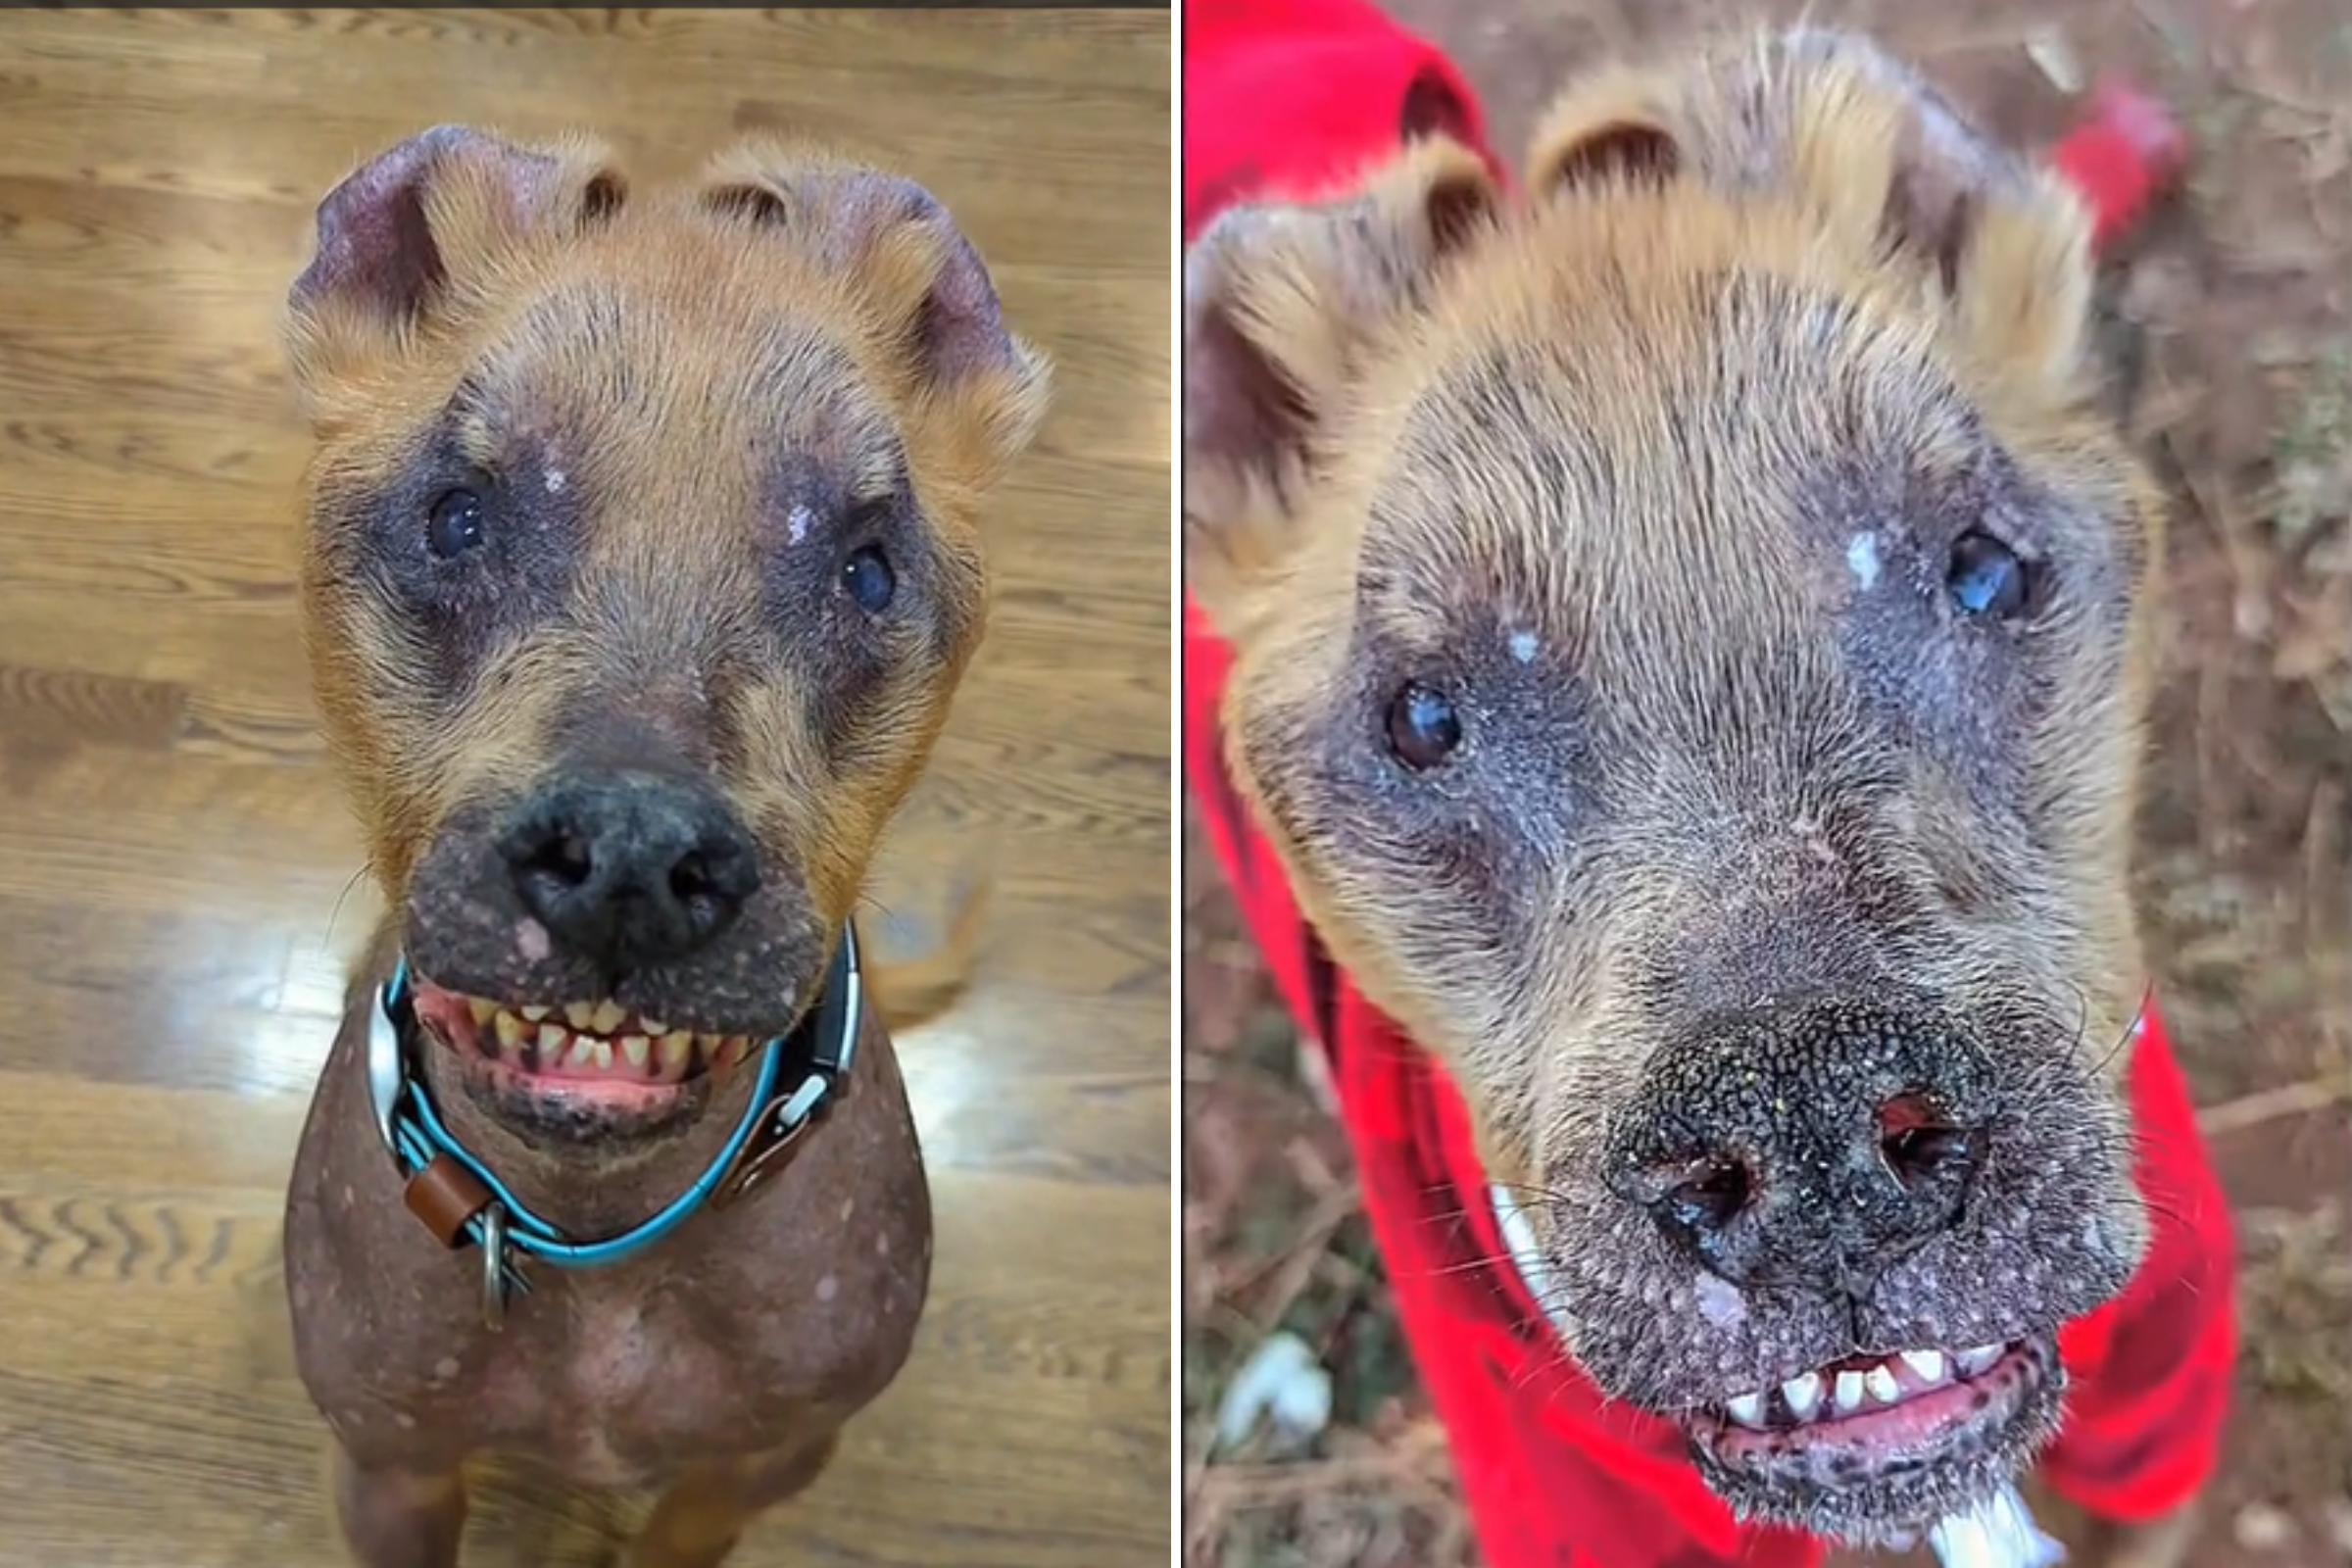 Rescue Dog With Rare Mix of 6 Breeds Captivates Internet: ‘Born Different’